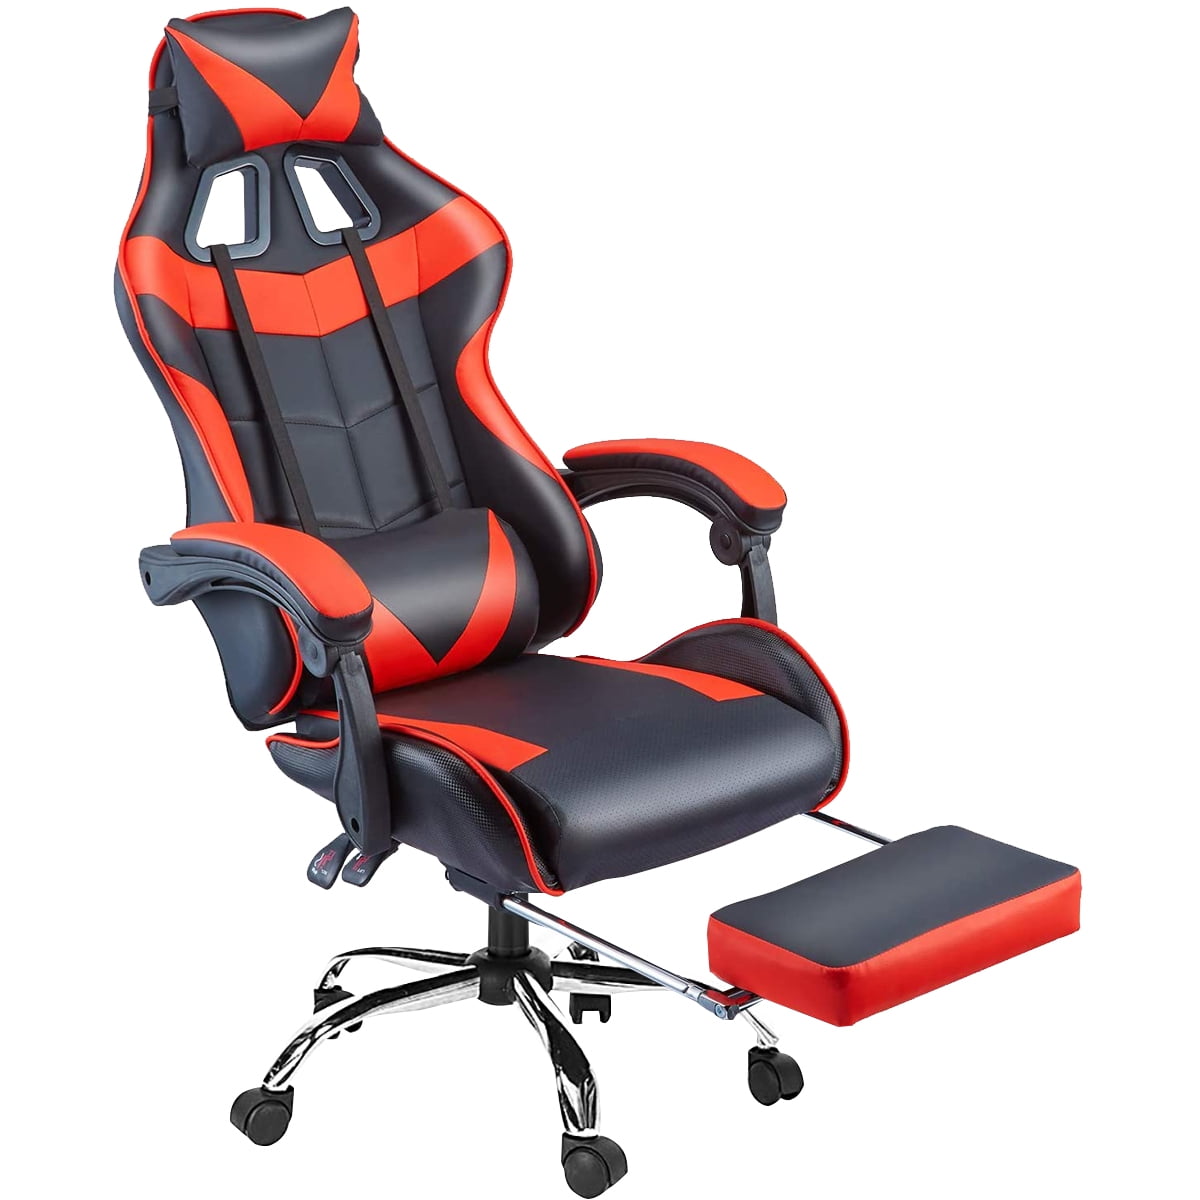 Blue Massage Lumbar Support and Headrest Pillow Gaming Chair Computer Chair Video Game Office Chair Ergonomic PC Chair Swivel High-Back Racing Style PU Leather with Footrest